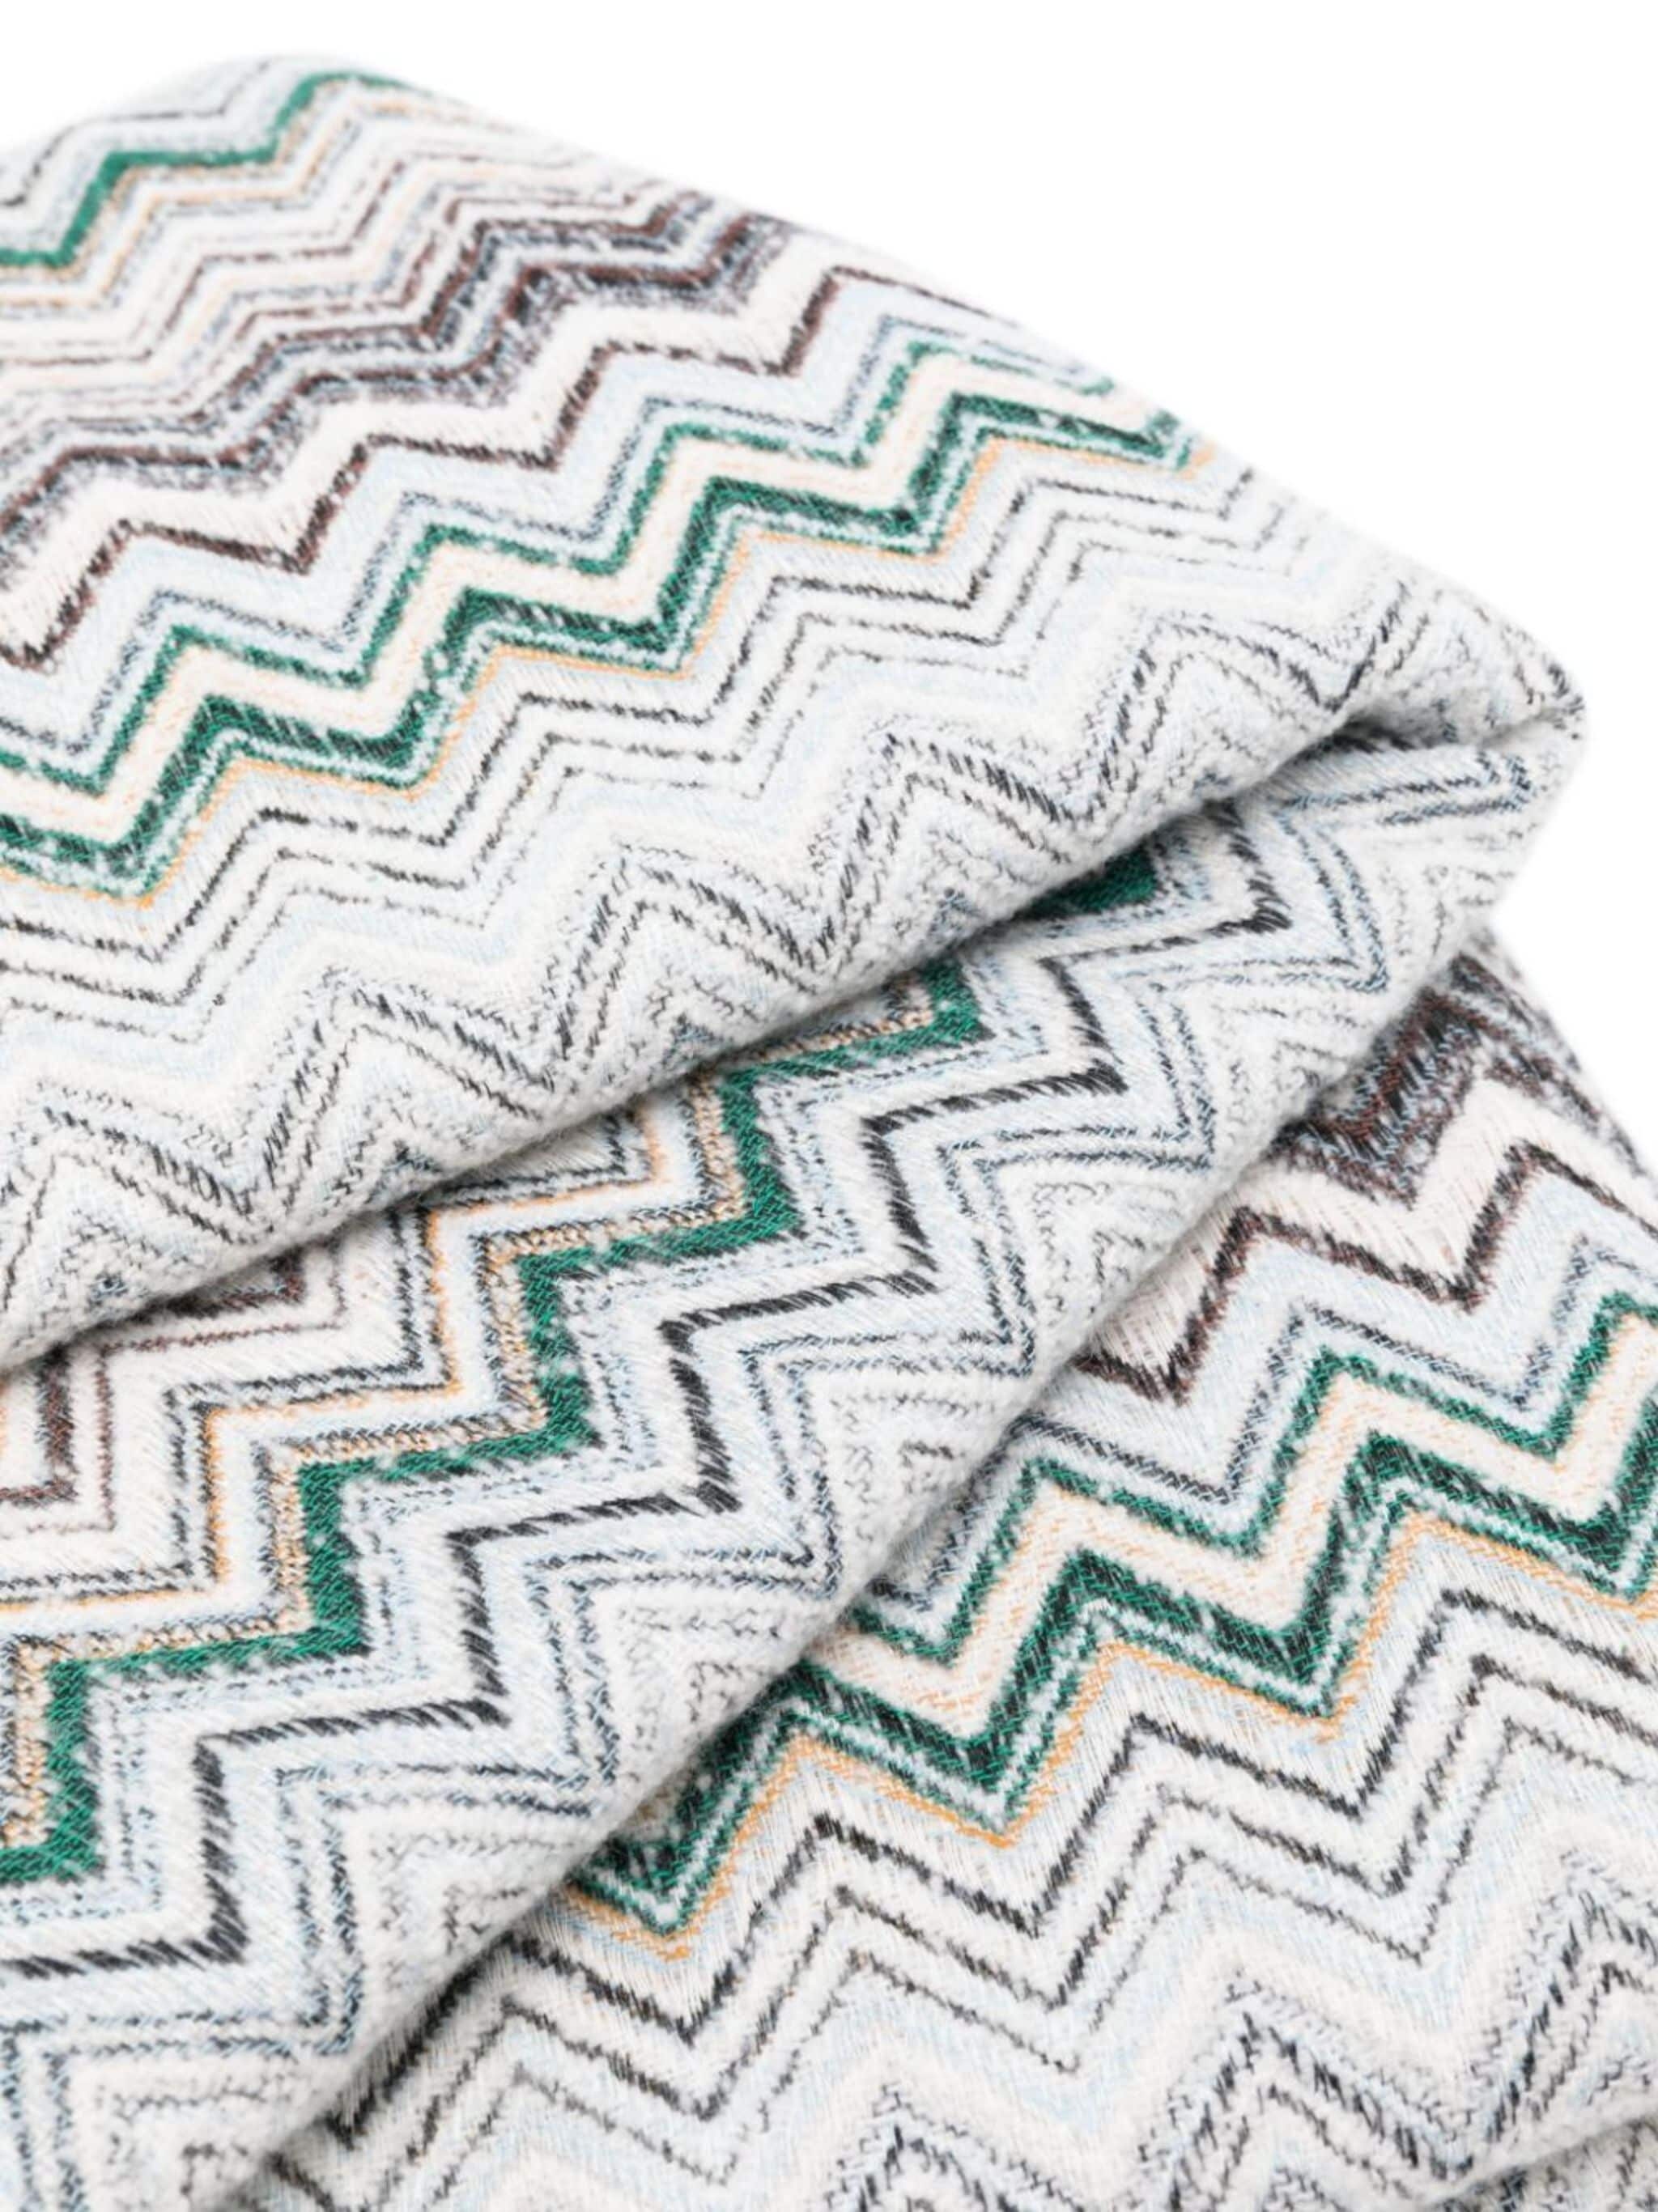 zigzag-woven knitted blanket - 2